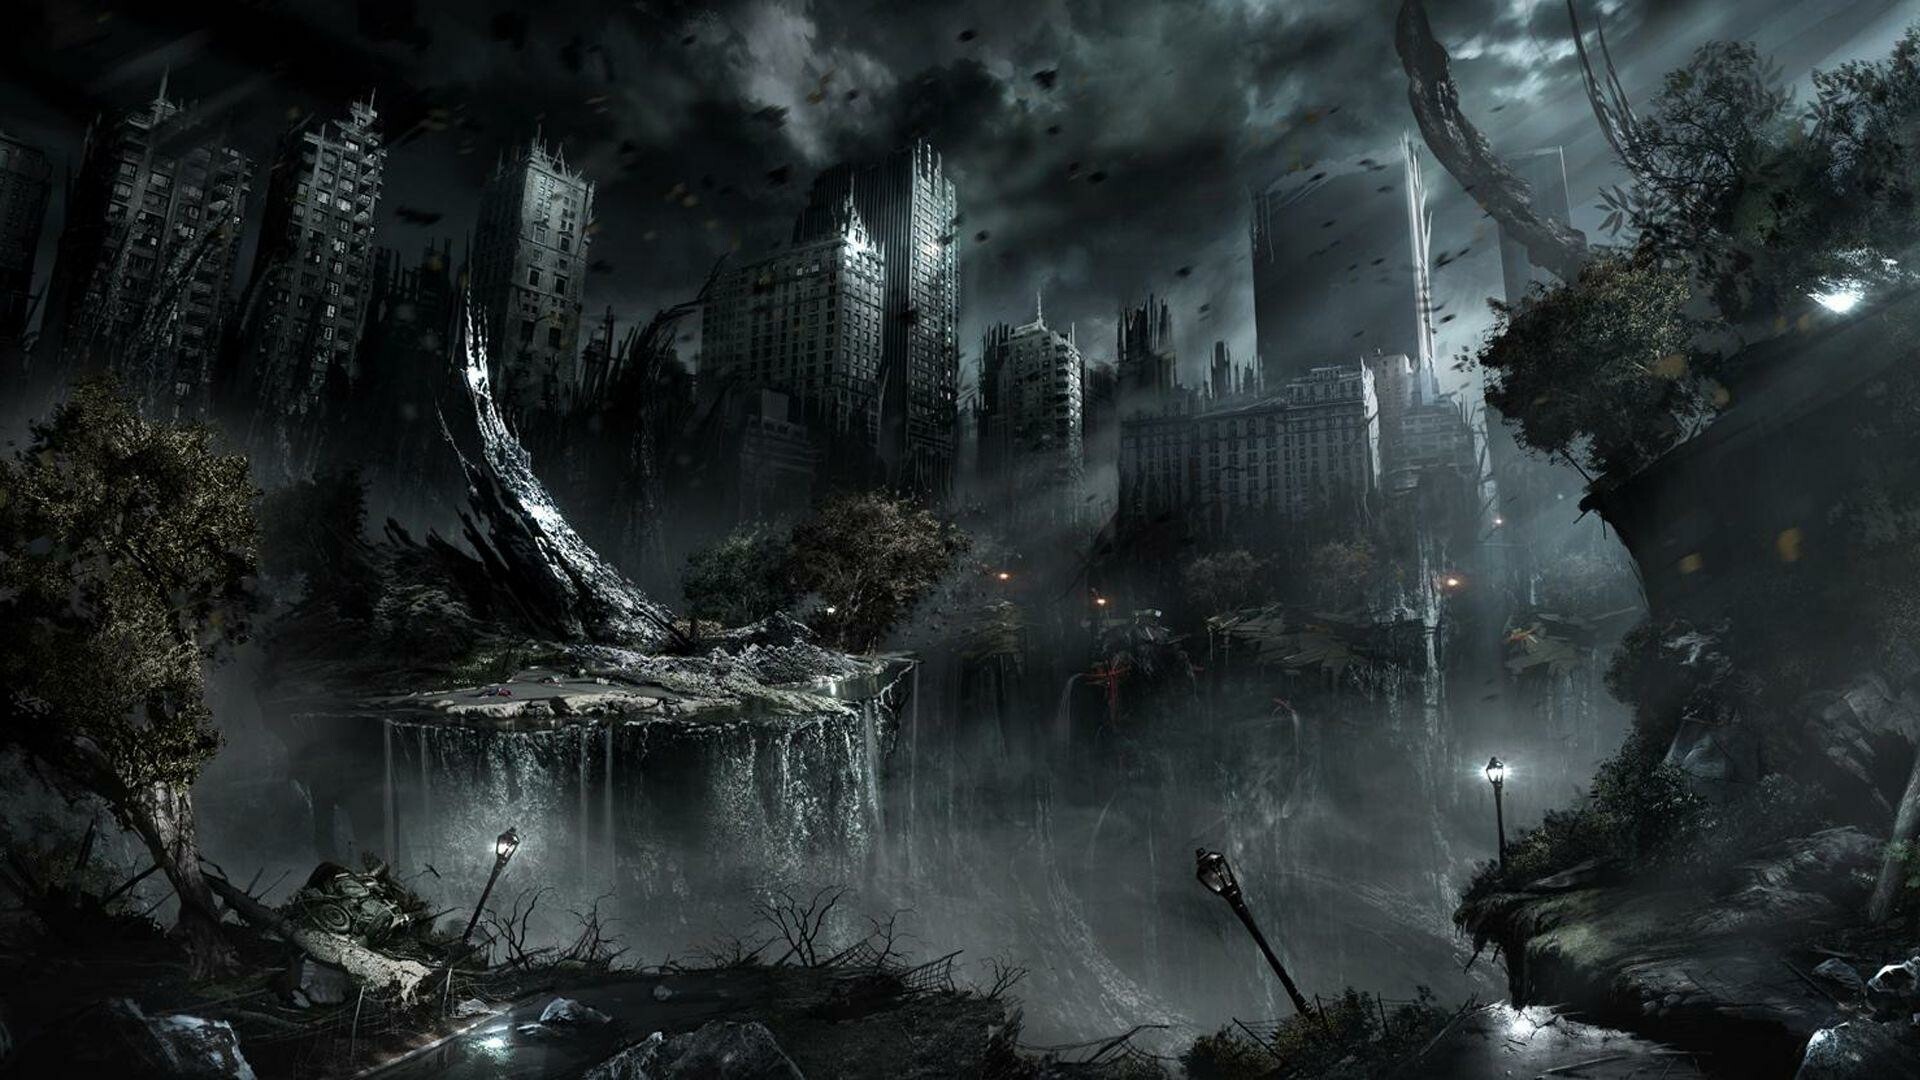 Post-apocalypse: Catastrophe, Ghost town. 1920x1080 Full HD Wallpaper.